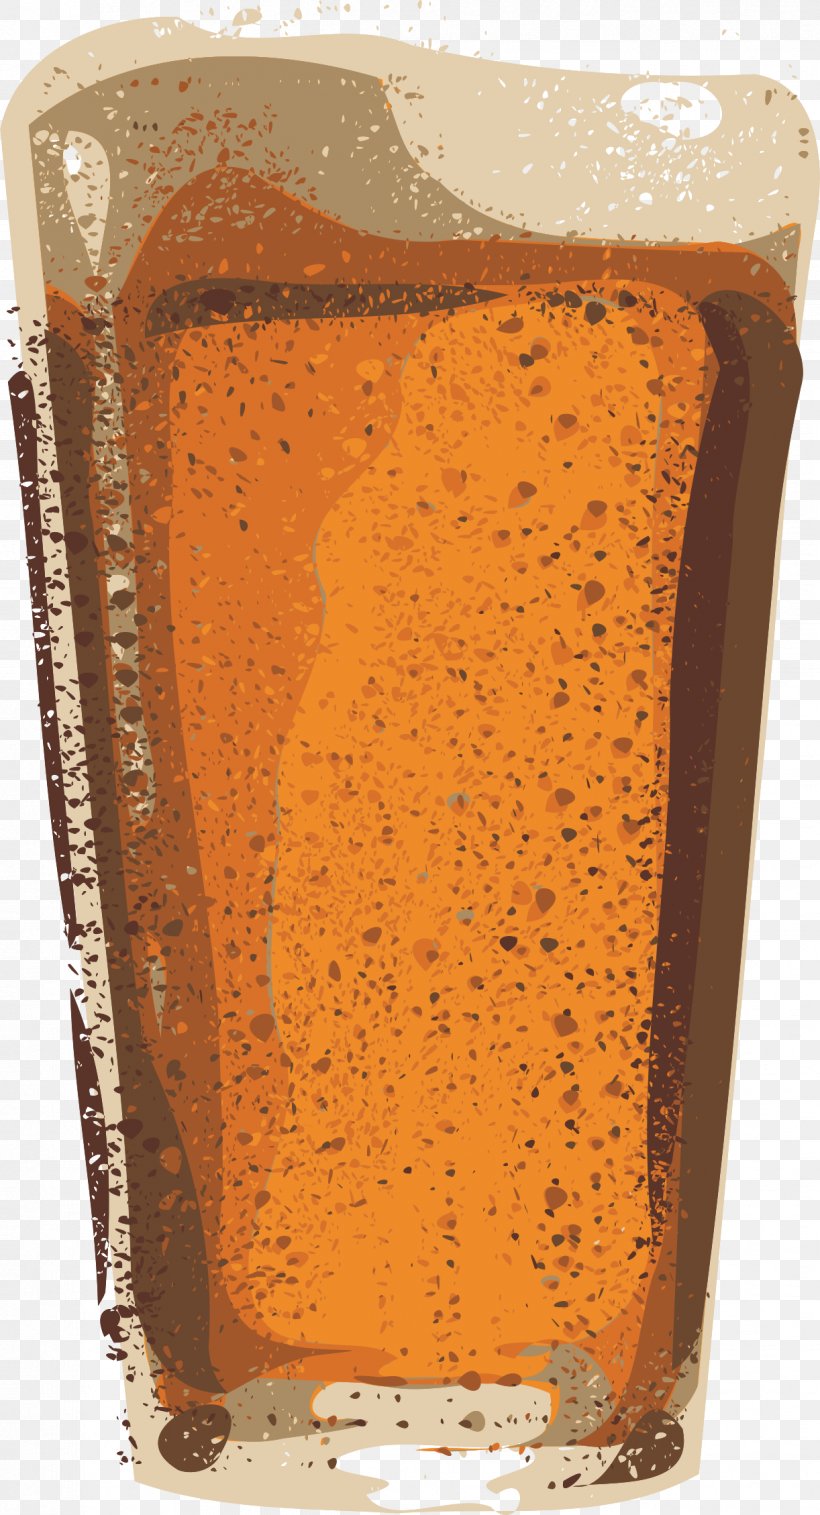 Beer Glasses Pint Glass Clip Art, PNG, 1222x2258px, Beer, Beer Glass, Beer Glasses, Beverage Can, Bottle Download Free